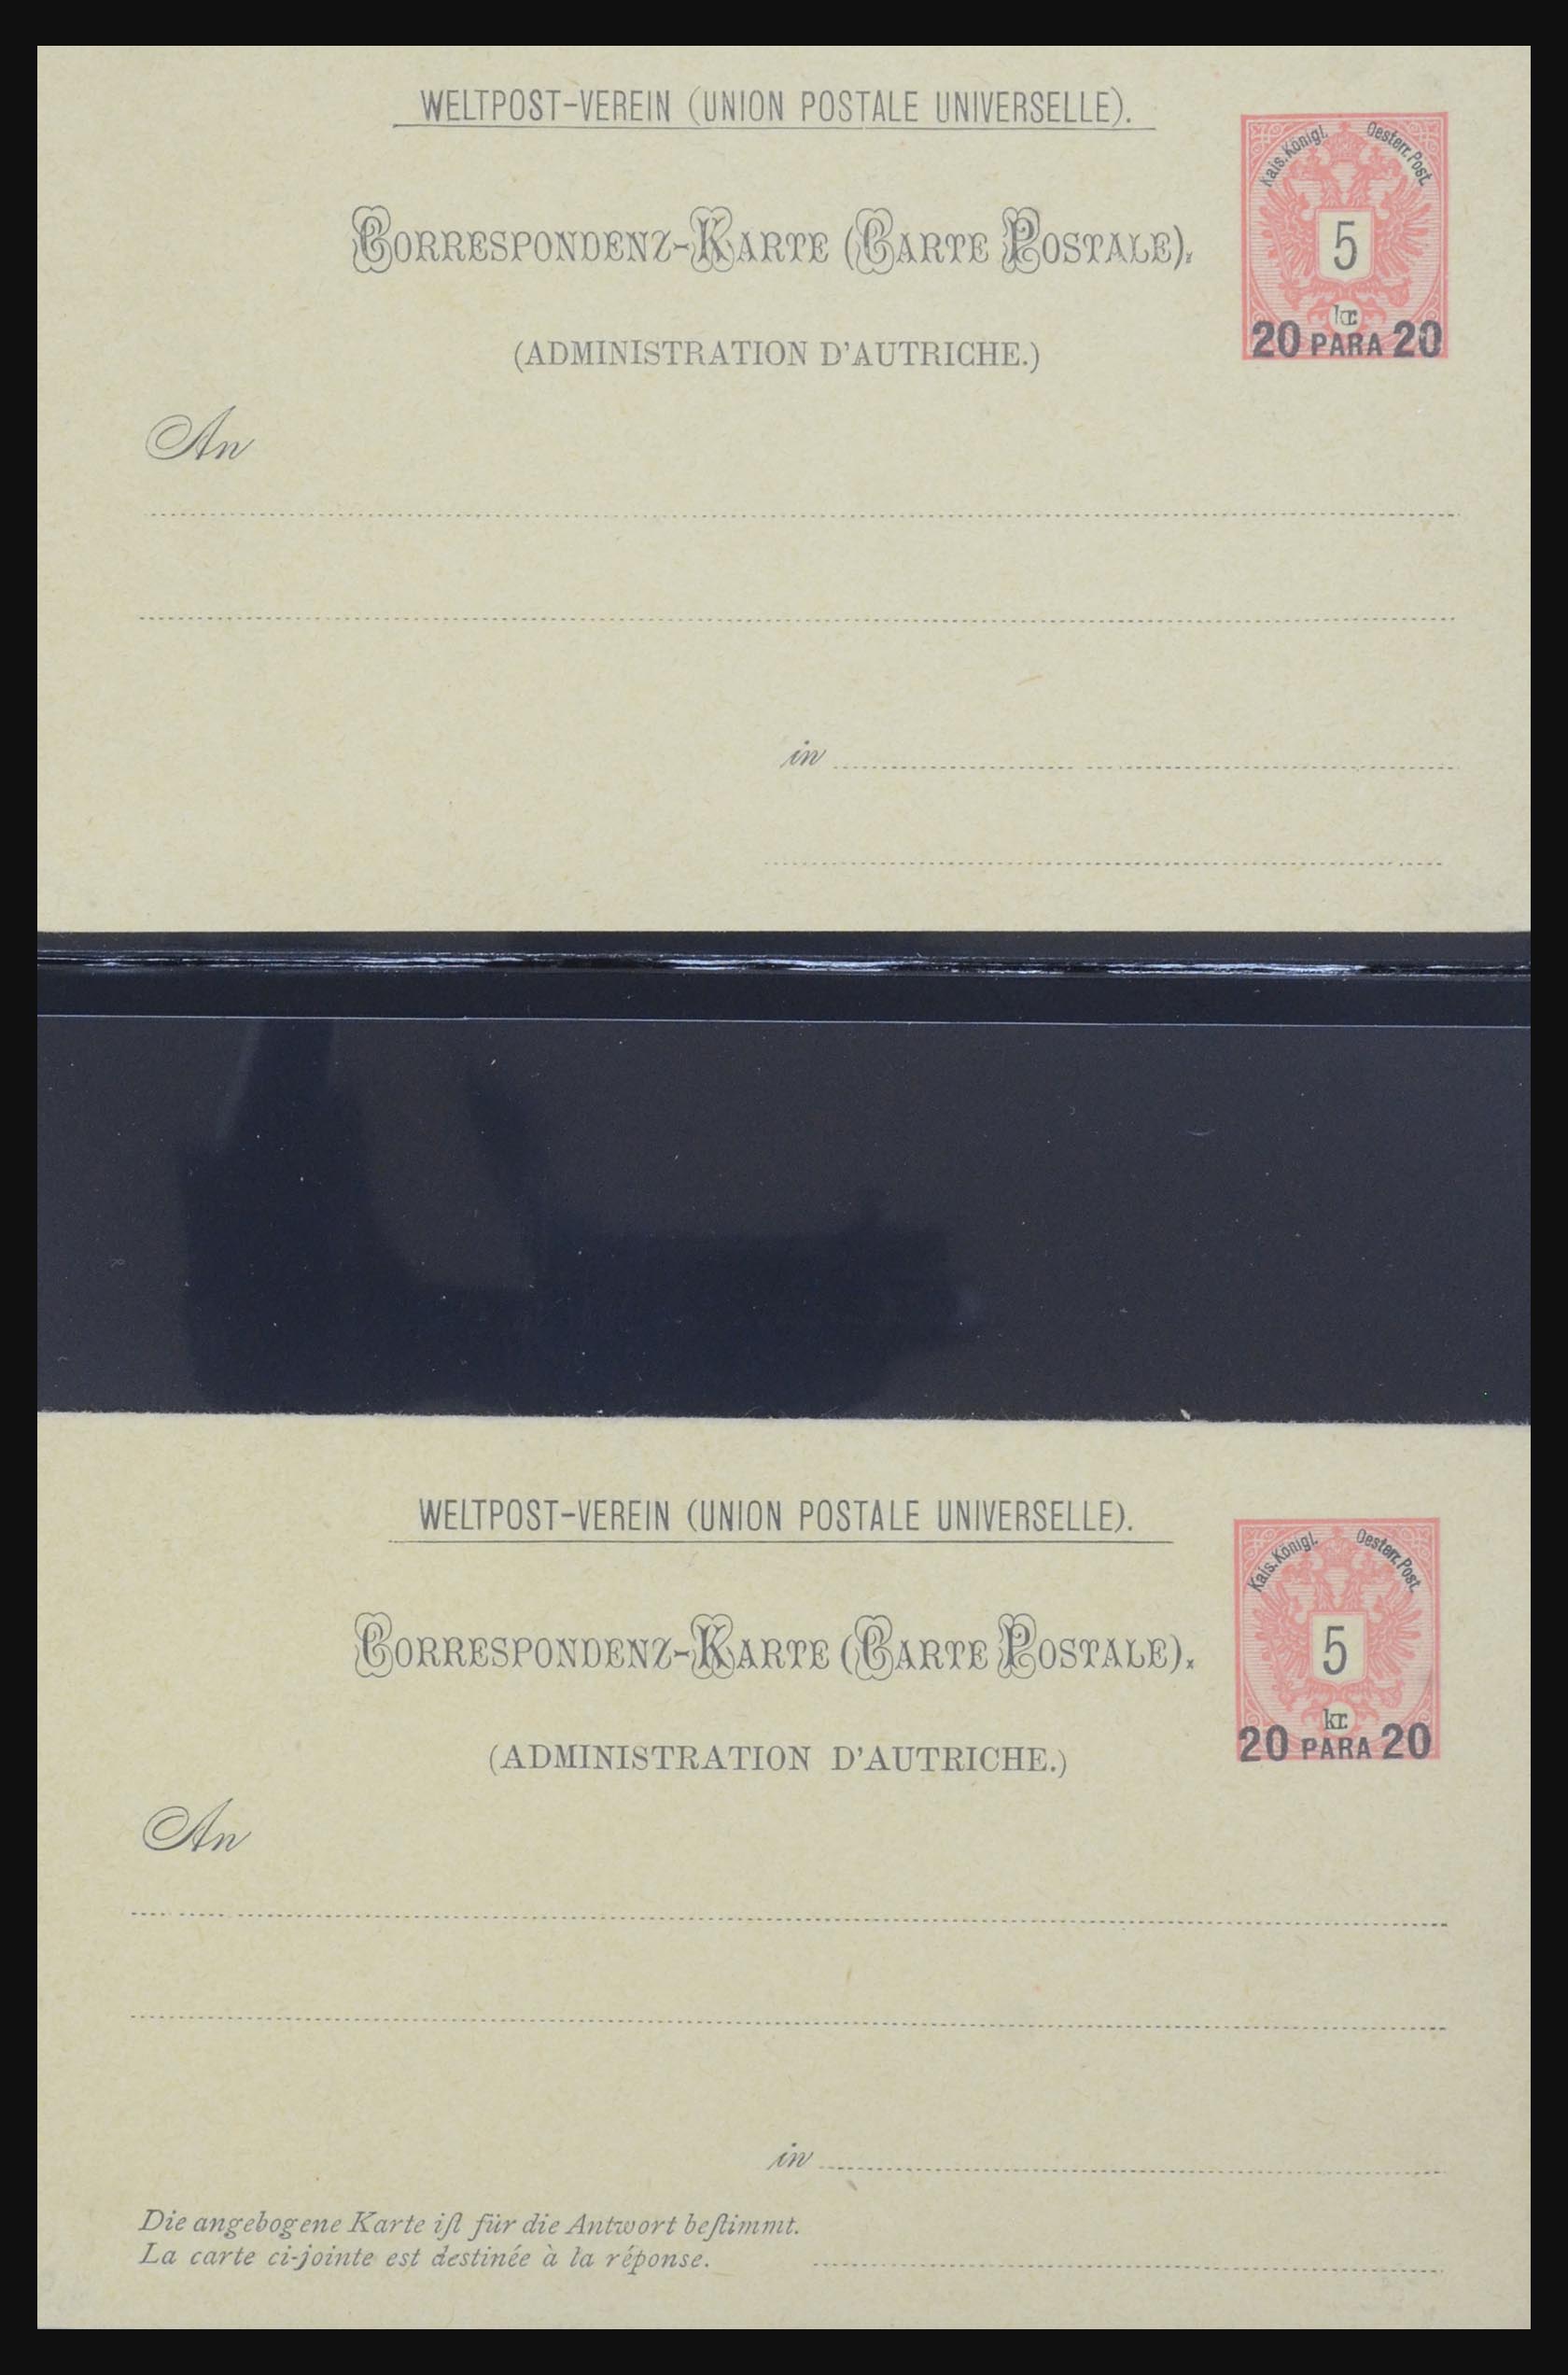 32254 0032 - 32254 Austria covers from 1800.